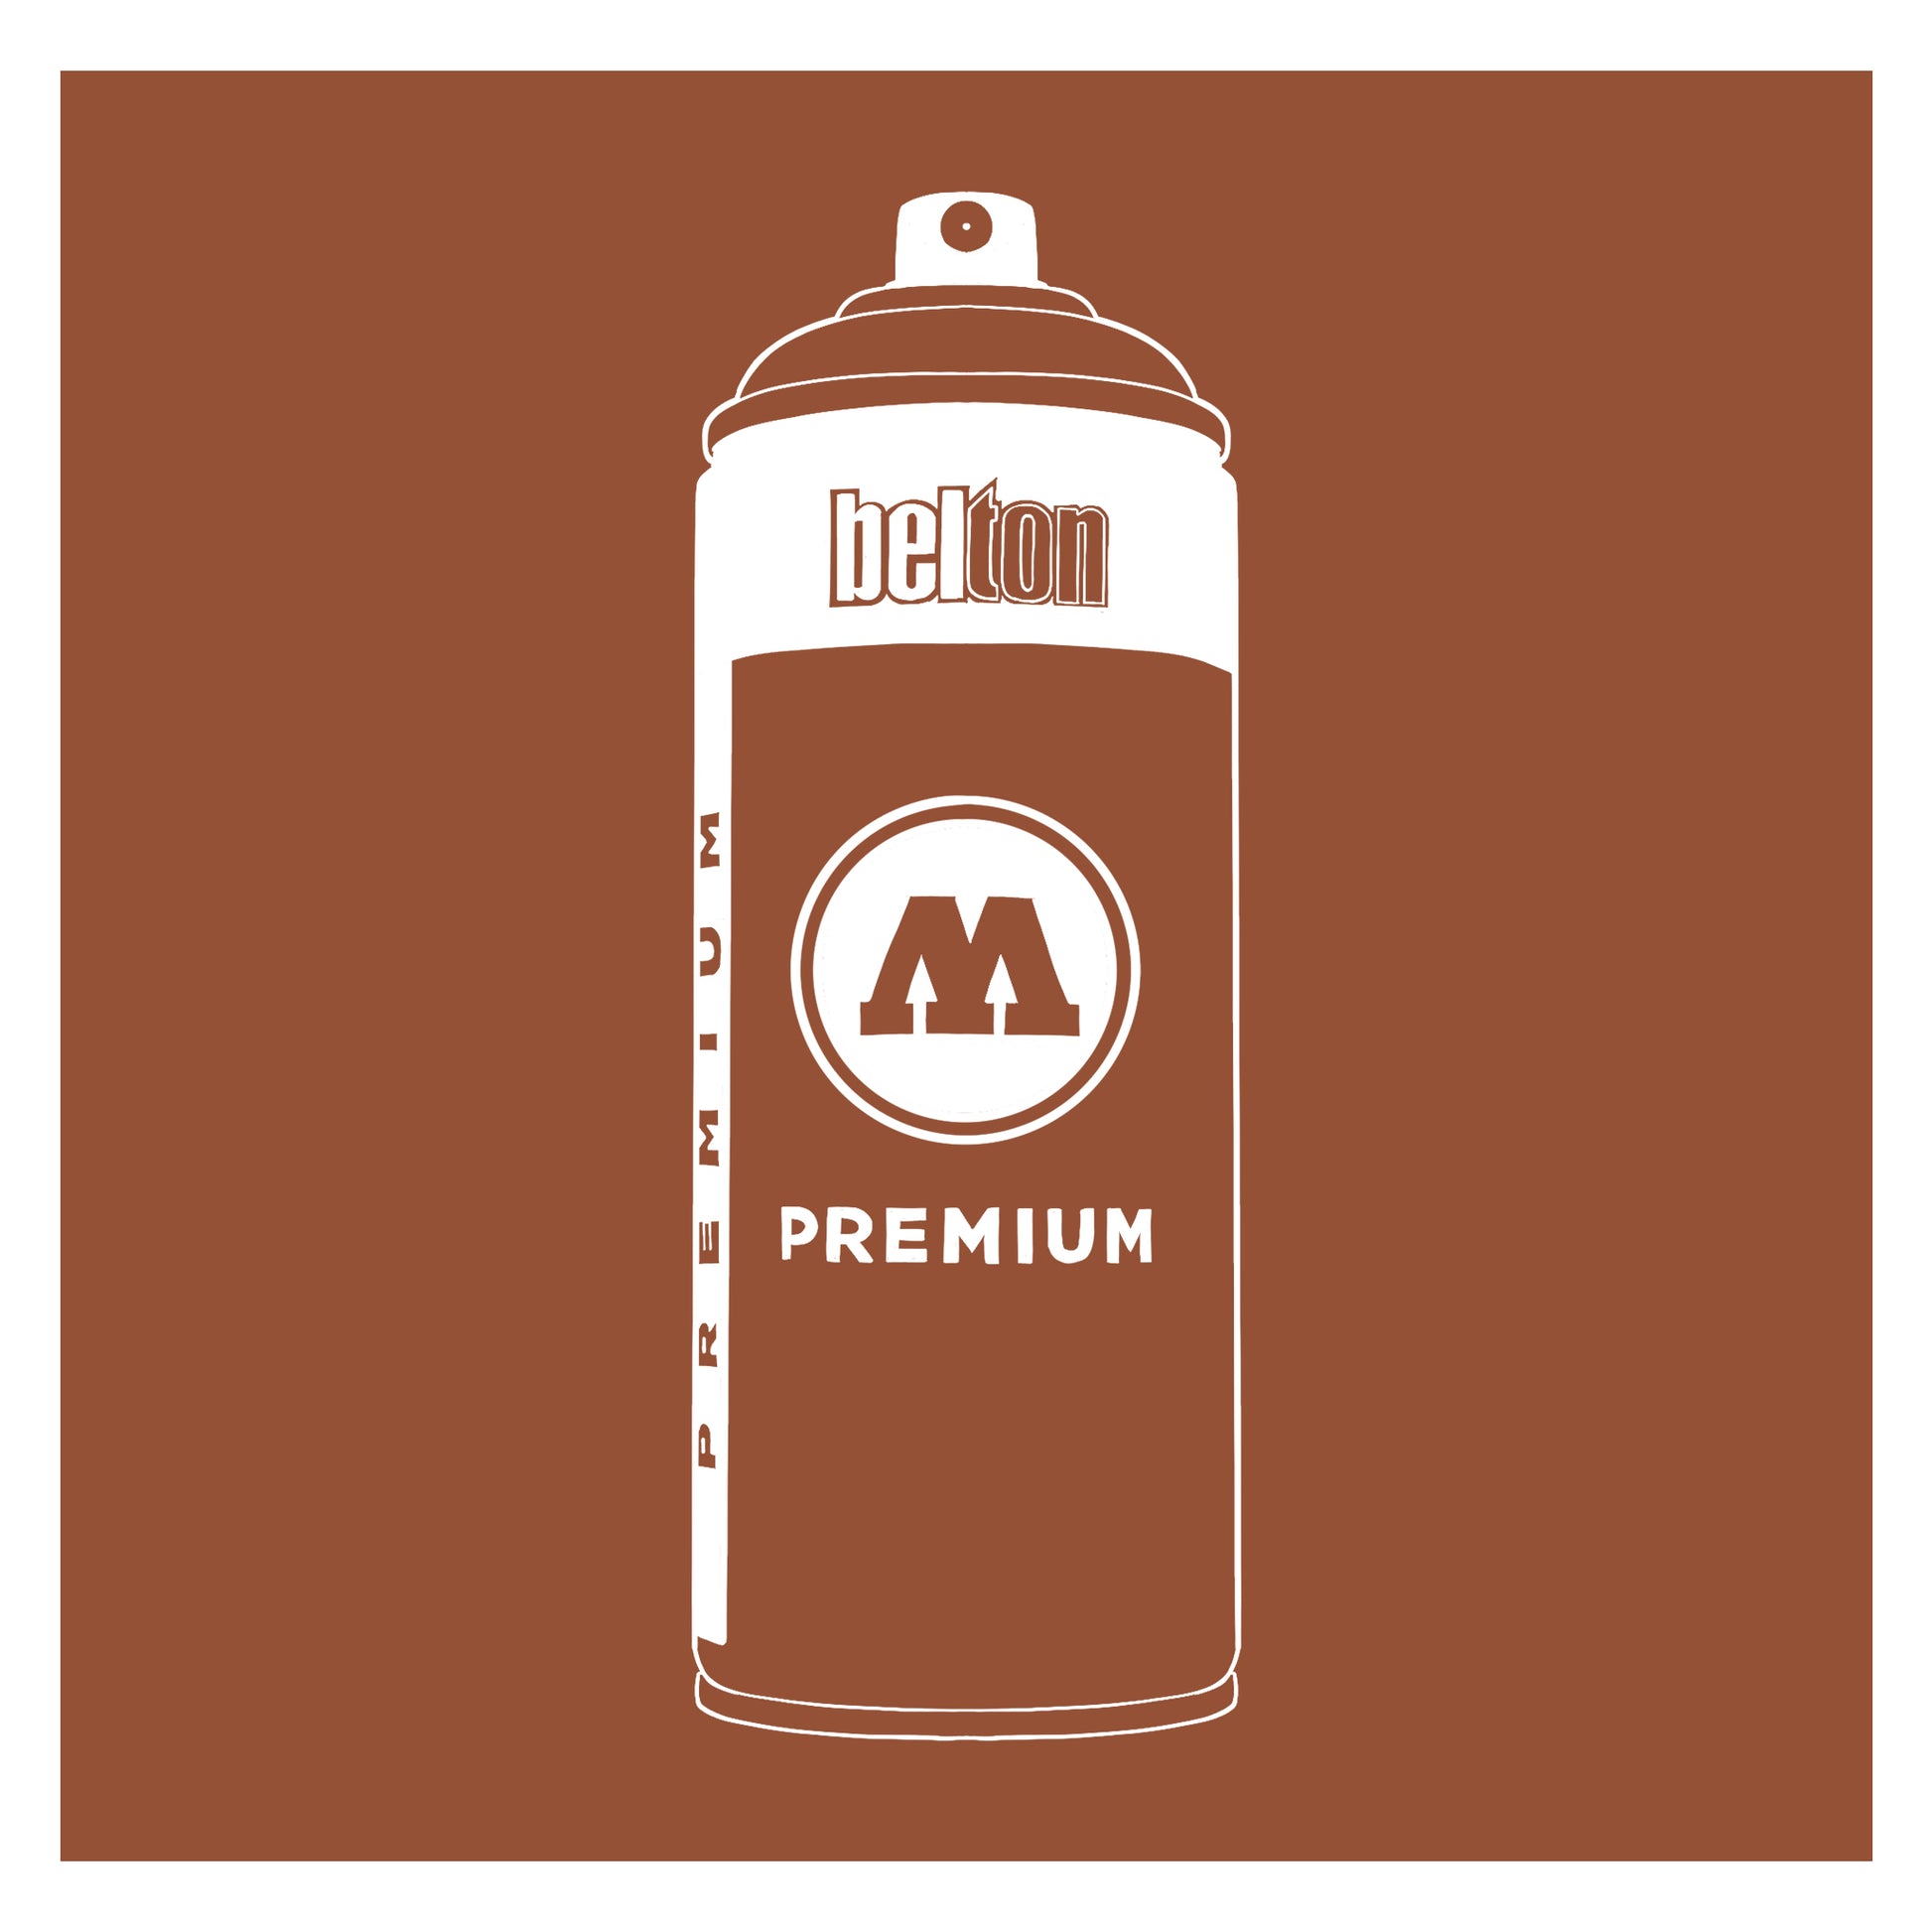 A white outline drawing of a chestnut brown spray paint can with the words "belton","premium" and the letter"M" written on the face in black and white font. The background is a color swatch of the same chestnut brown with a white border